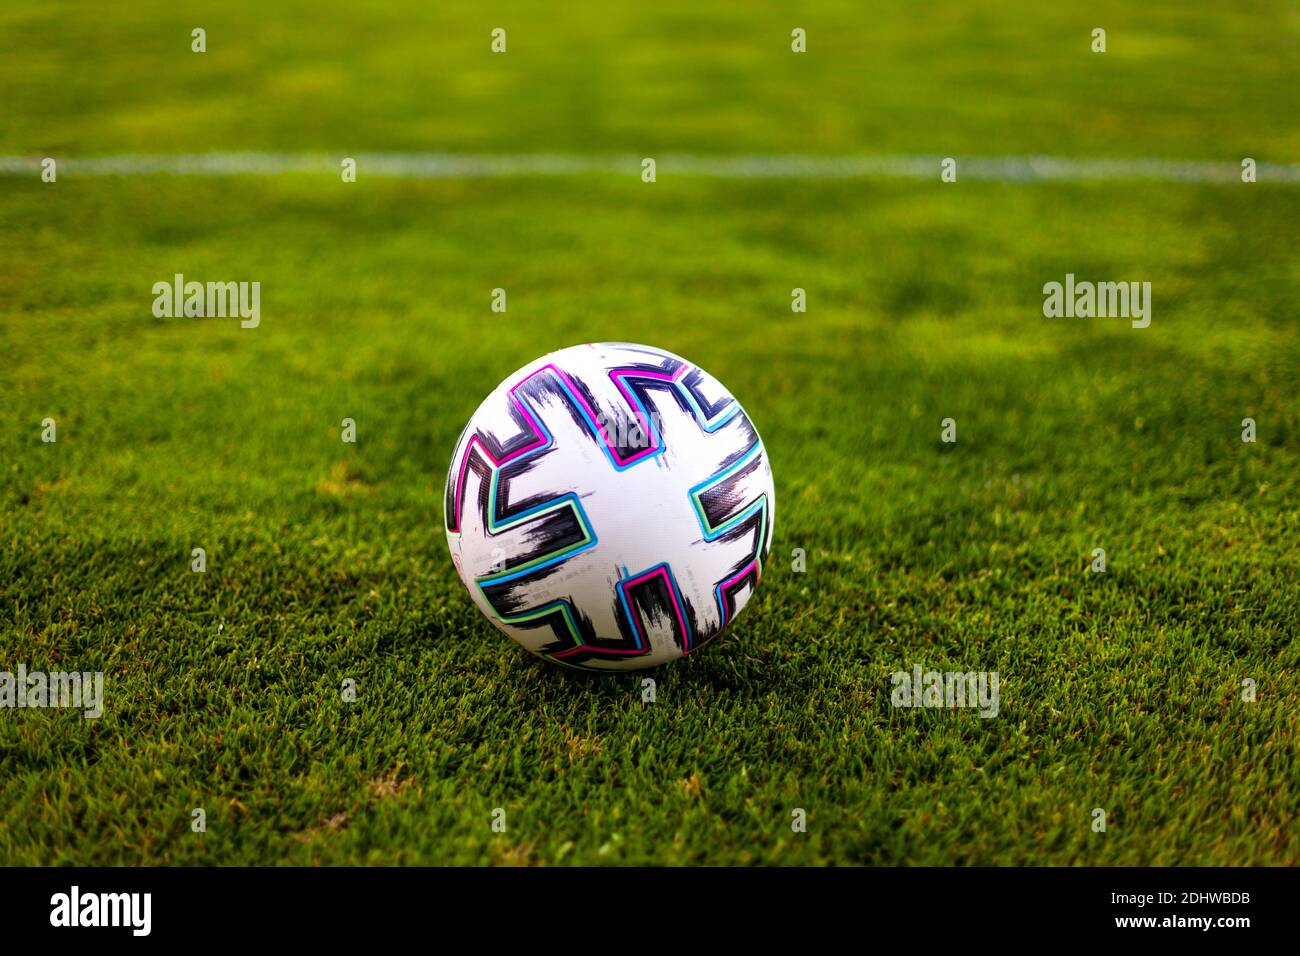 Ried, Austria - 31 July, 2020. official football ball Stock Photo